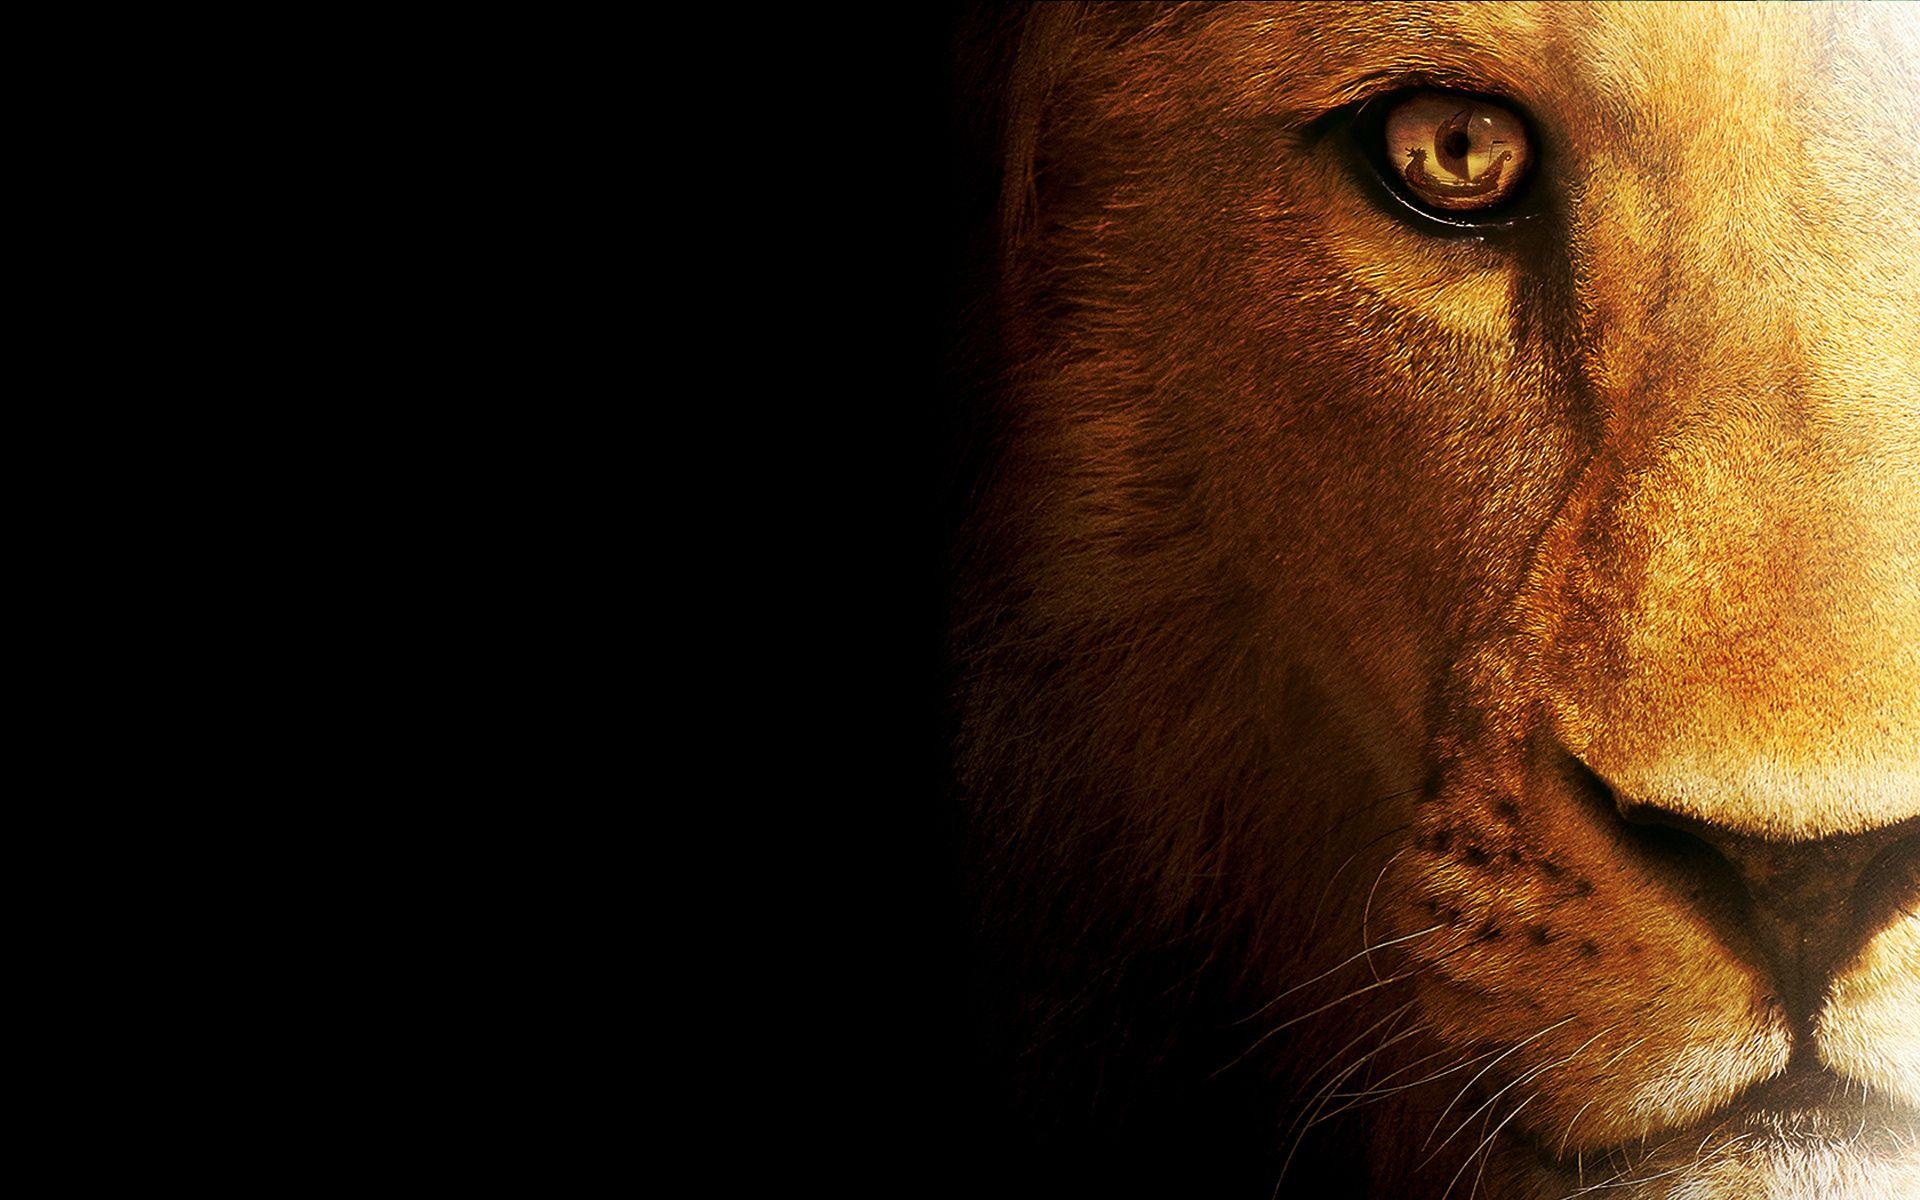 10 Exquisite Learn To Draw Animals Ideas  Lion wallpaper Abstract lion  Lion hd wallpaper